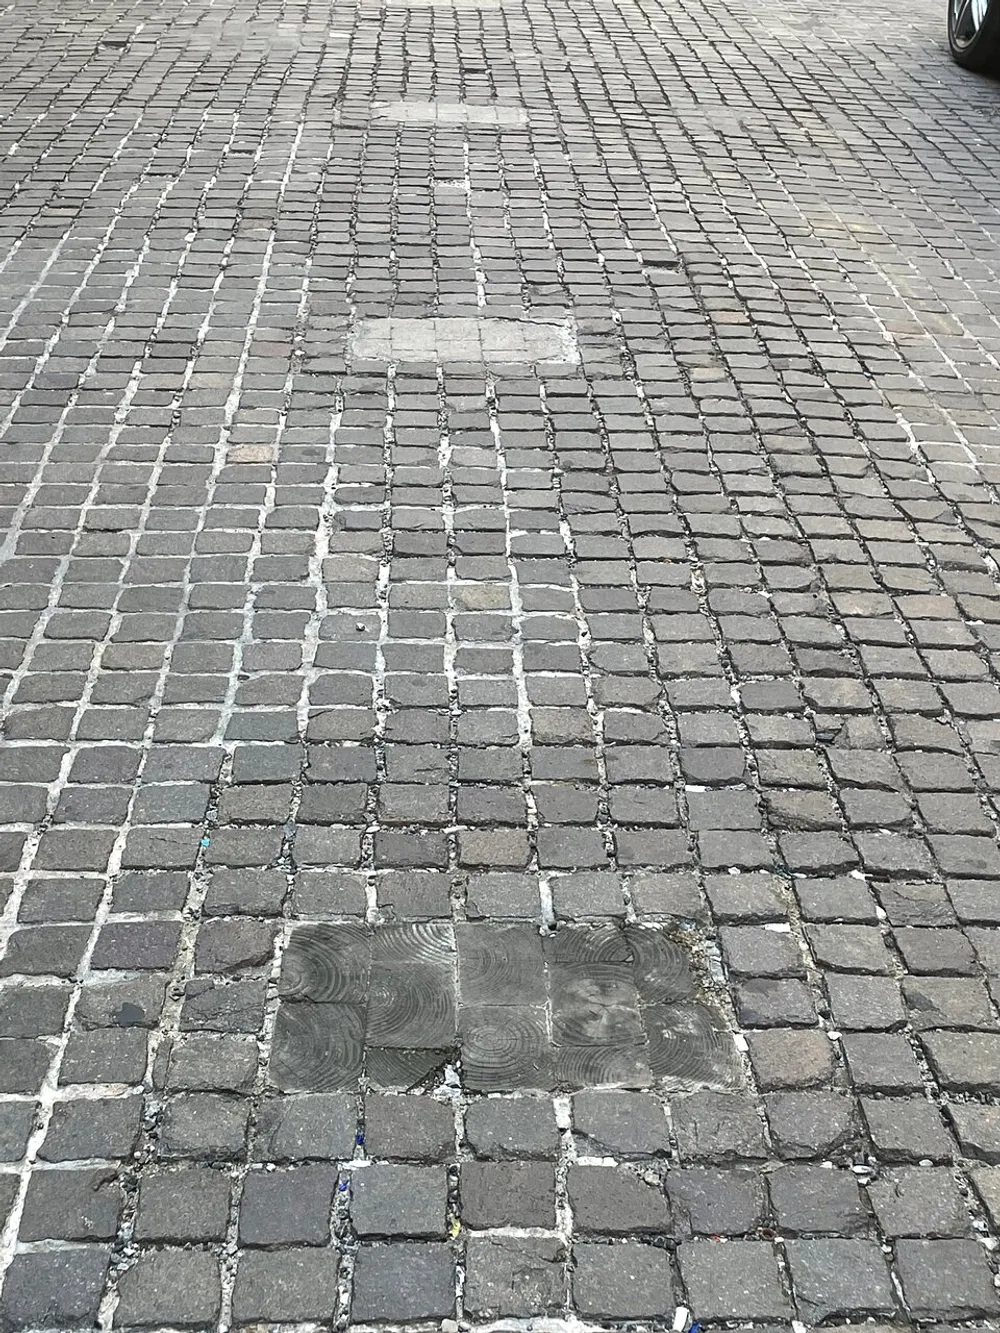 The image shows a section of cobblestone pavement with a pattern of painted white lines and a couple of utility access covers